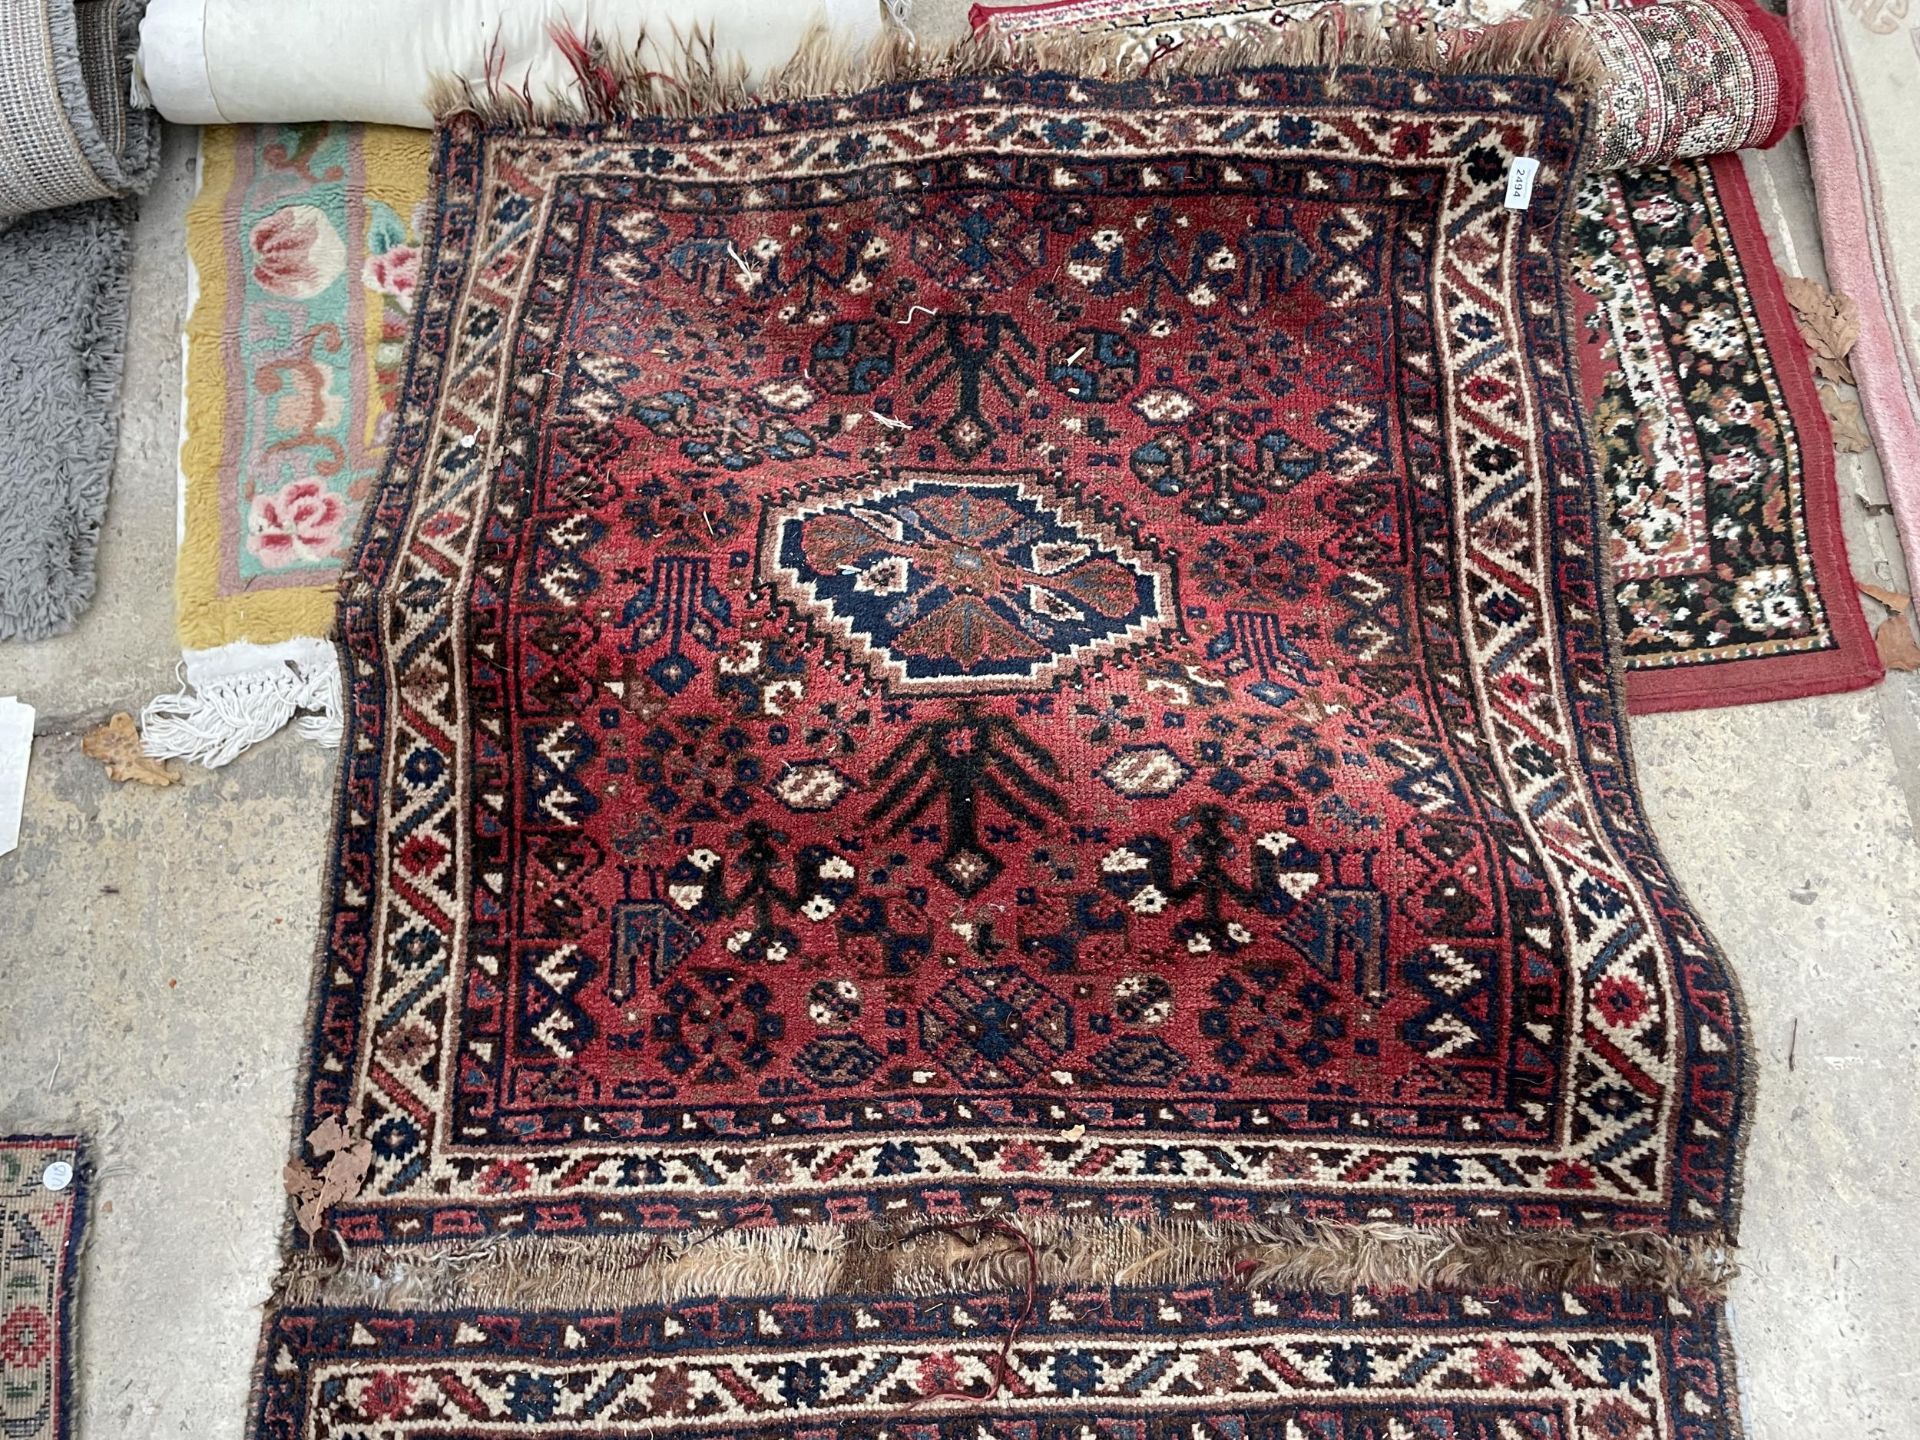 A SMALL VINTAGE RED PATTERNED FRINGED RUG - Image 2 of 2